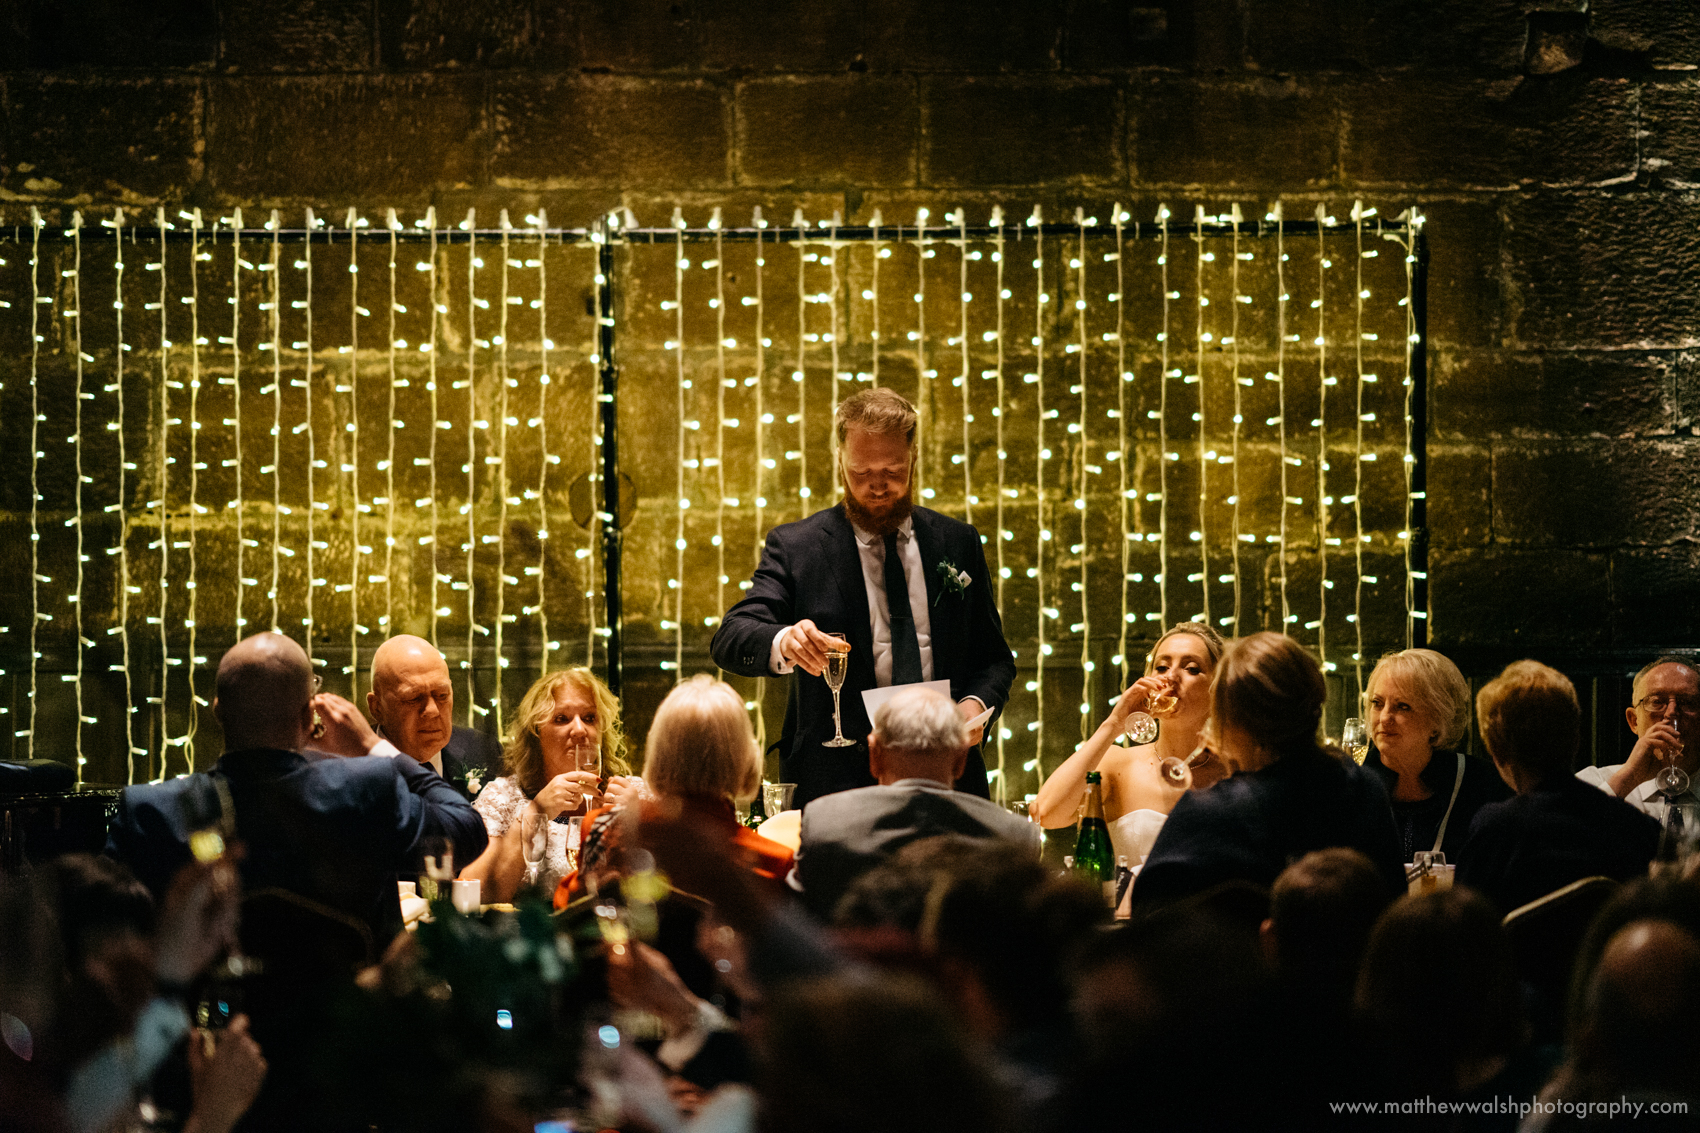 The groom makes a toast to his lovely new wife